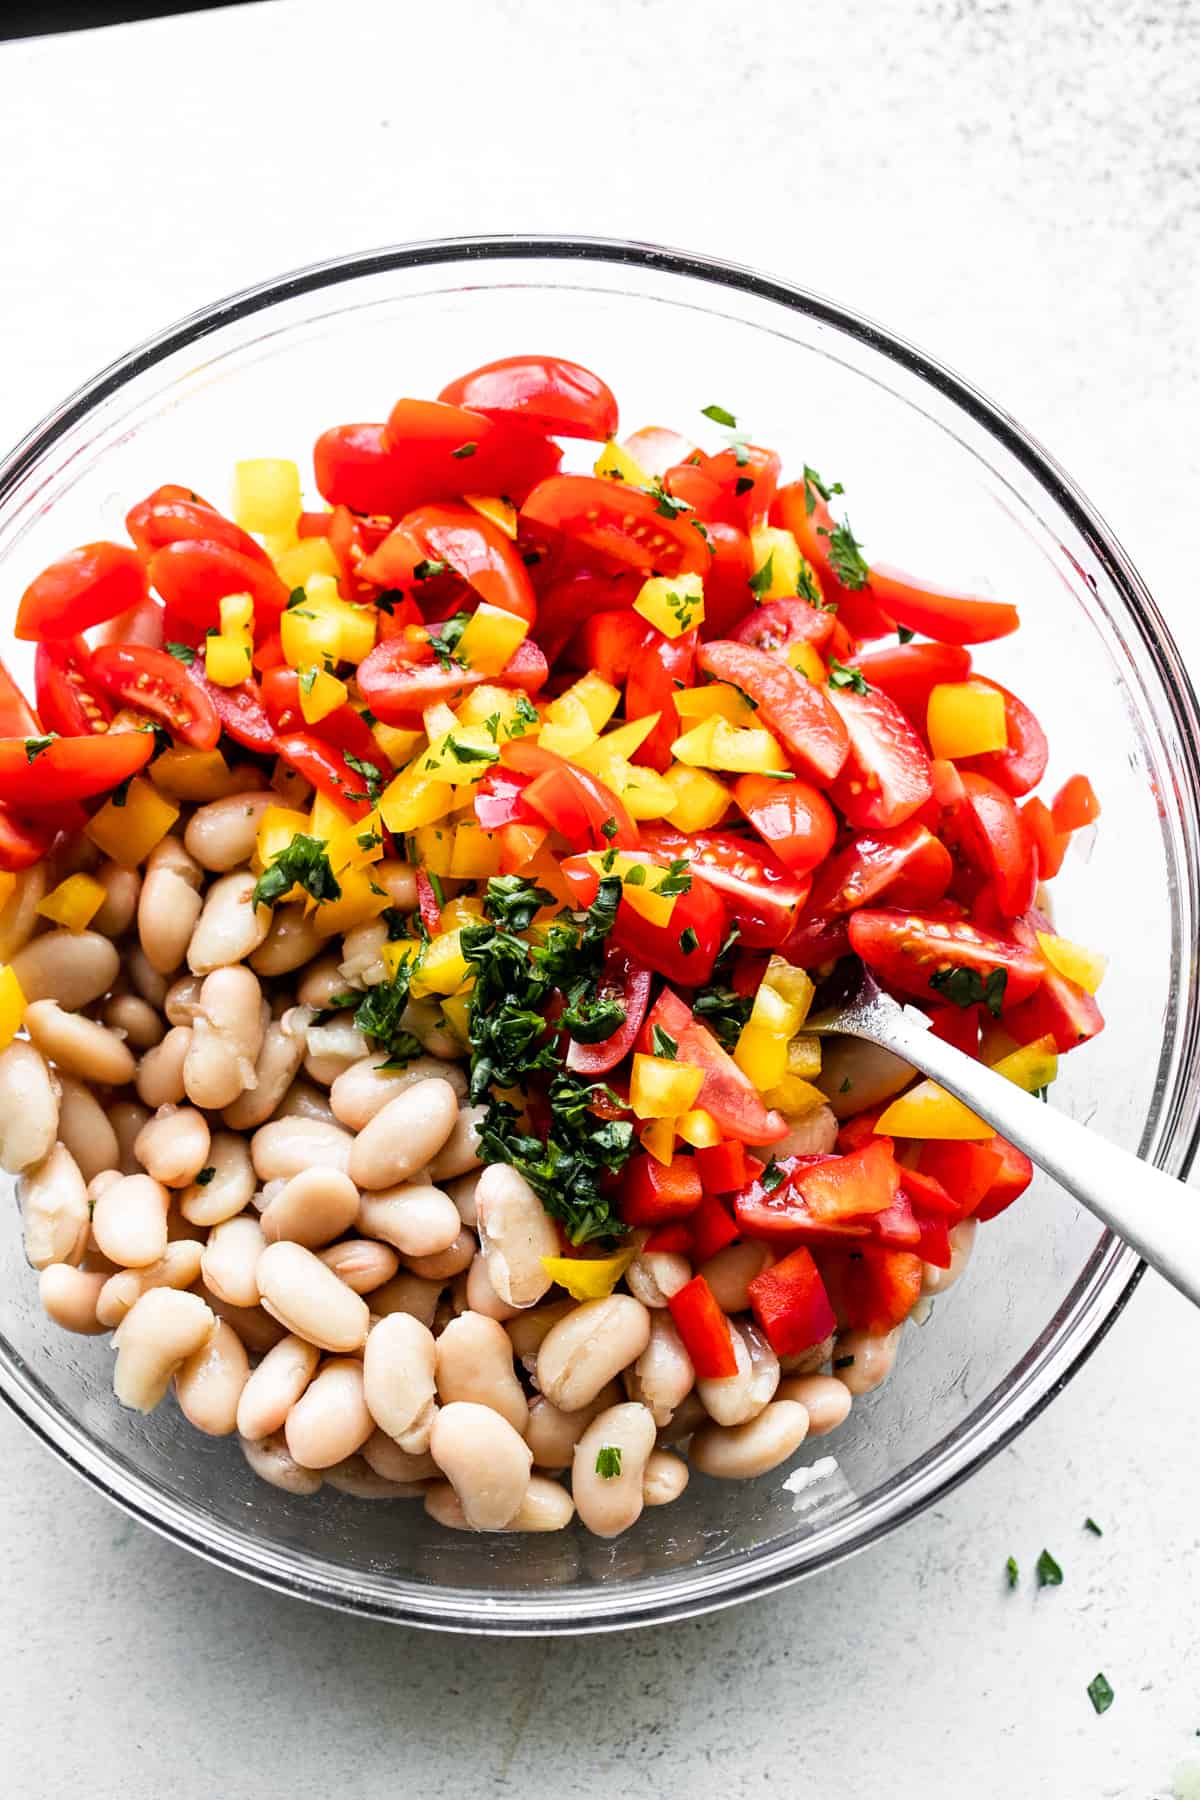 overhead shot of a large glass bowl filled with cannellini beans, halved red cherry tomatoes, diced red bell pepper, diced yellow bell pepper, and a sprinkle of chopped fresh basil set in the center.